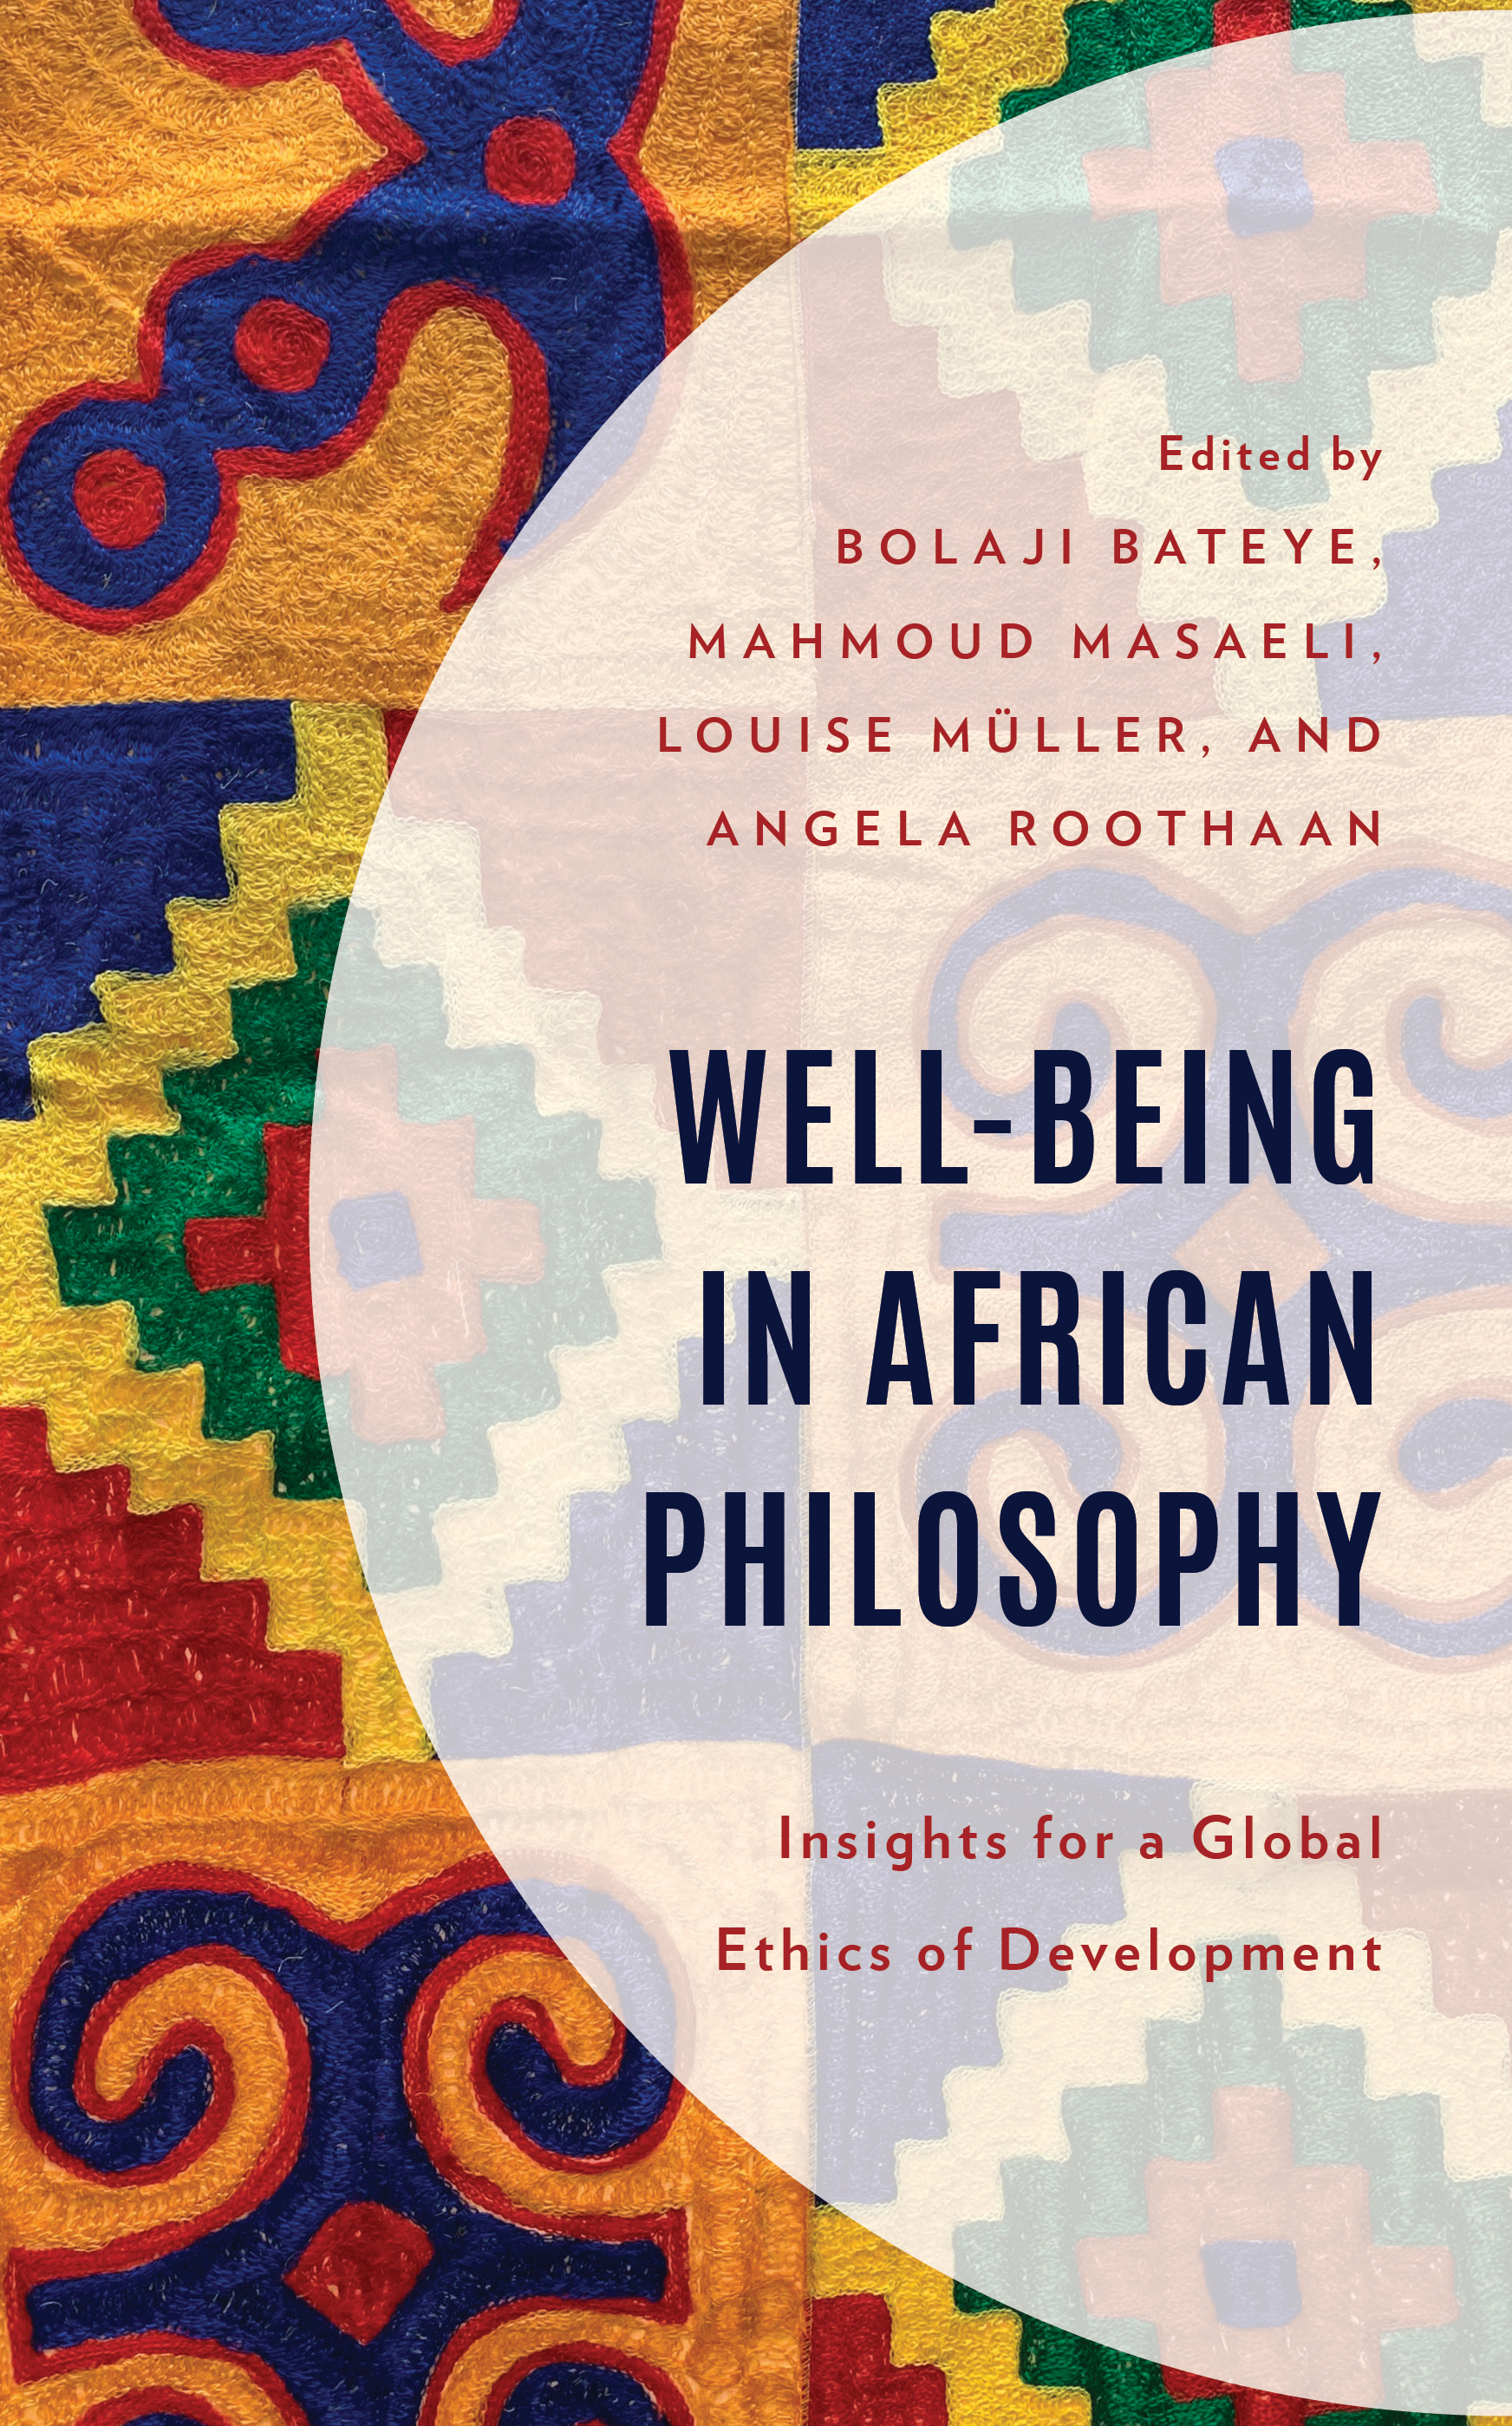 Well-Being in African Philosophy: Insights for a Global Ethics of Development